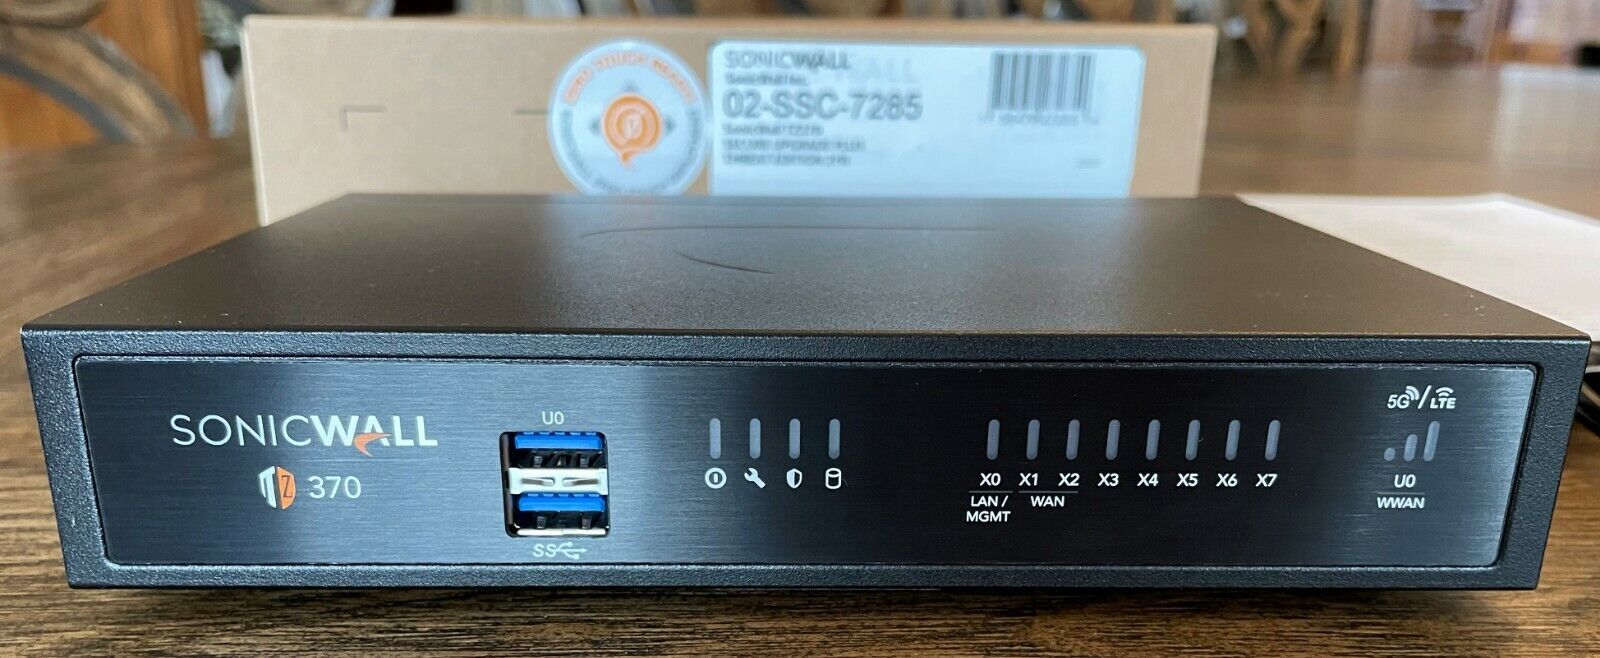 SONICWALL TZ370 SECURE UPGRADE PLUS THREAT EDITION 2YR Open Box - Used 2 weeks